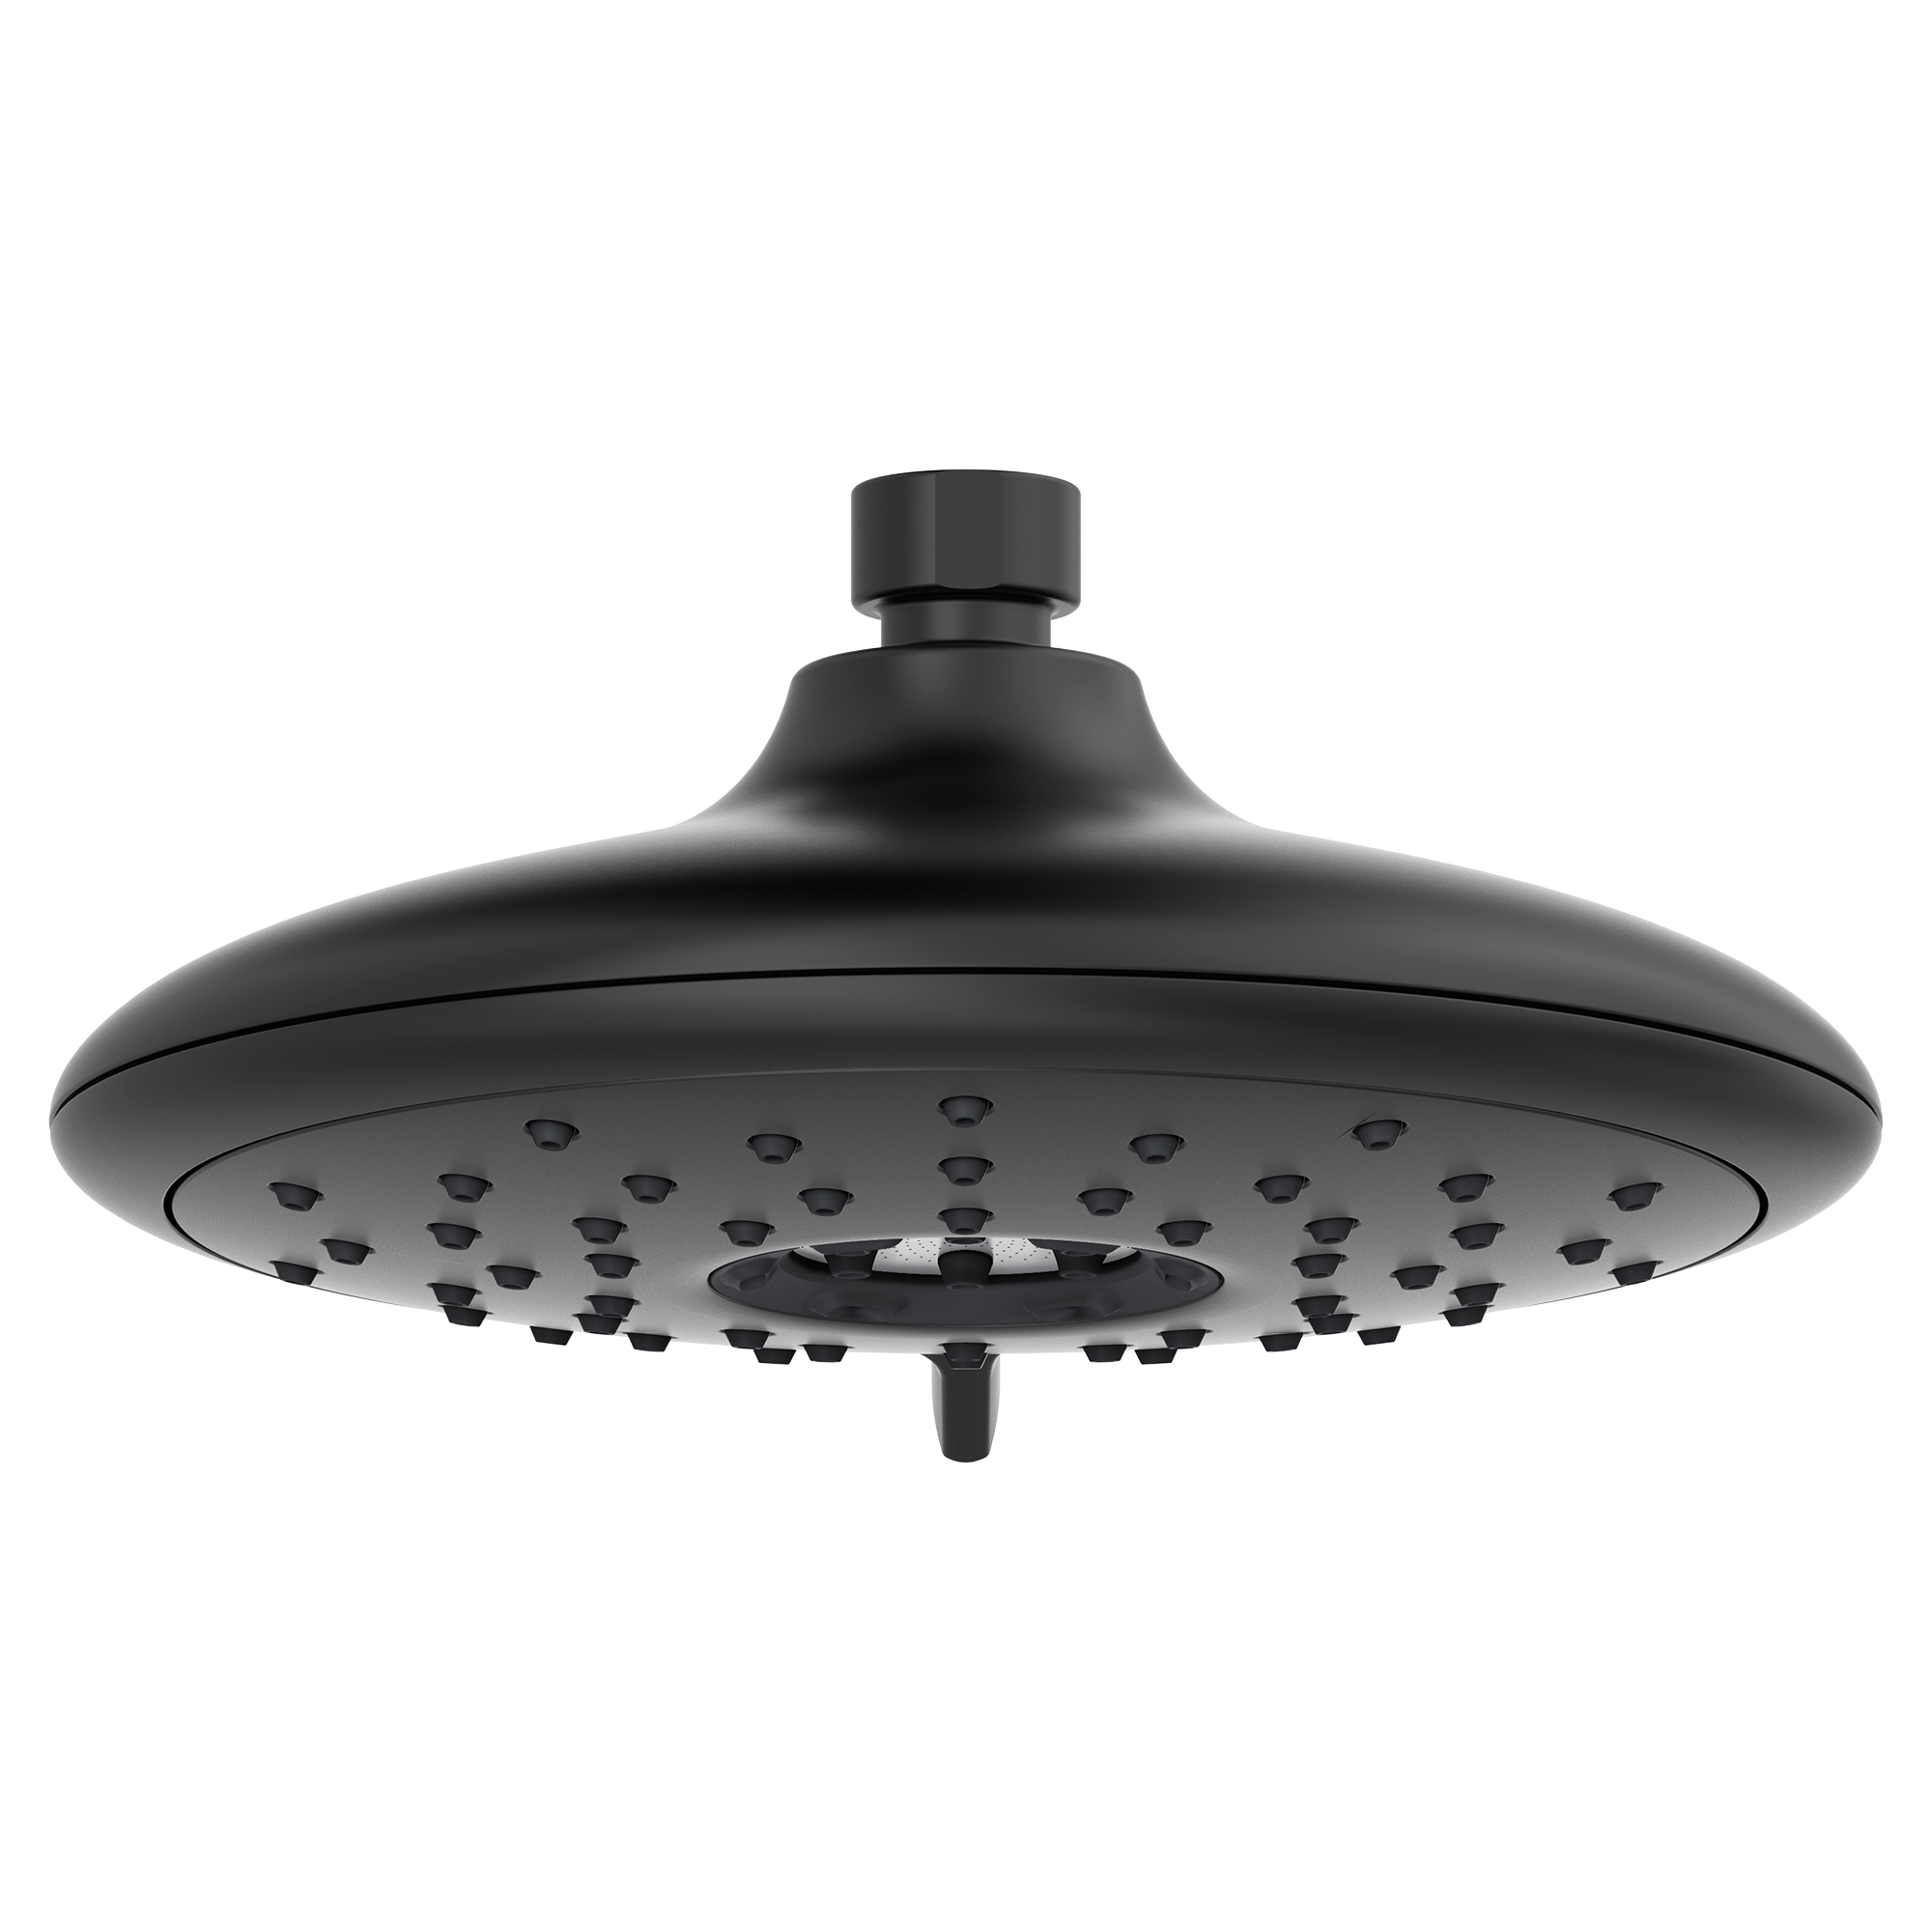 Spectra™ Fixed 7-Inch 1.8 gpm/6.8 L/
min Fixed Showerhead